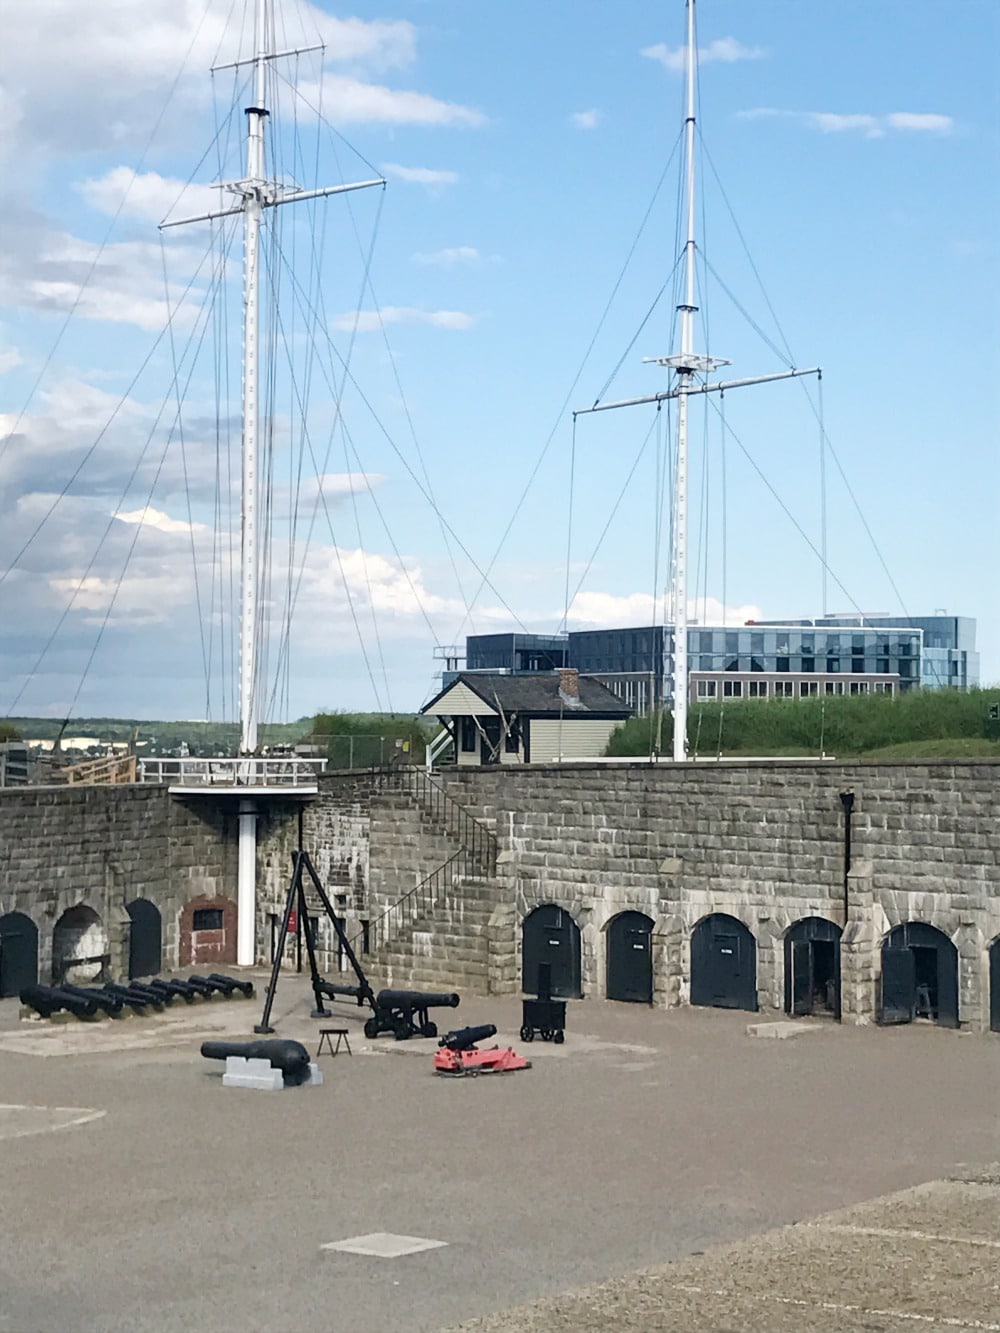 Things To Do in Halifax - Citadel